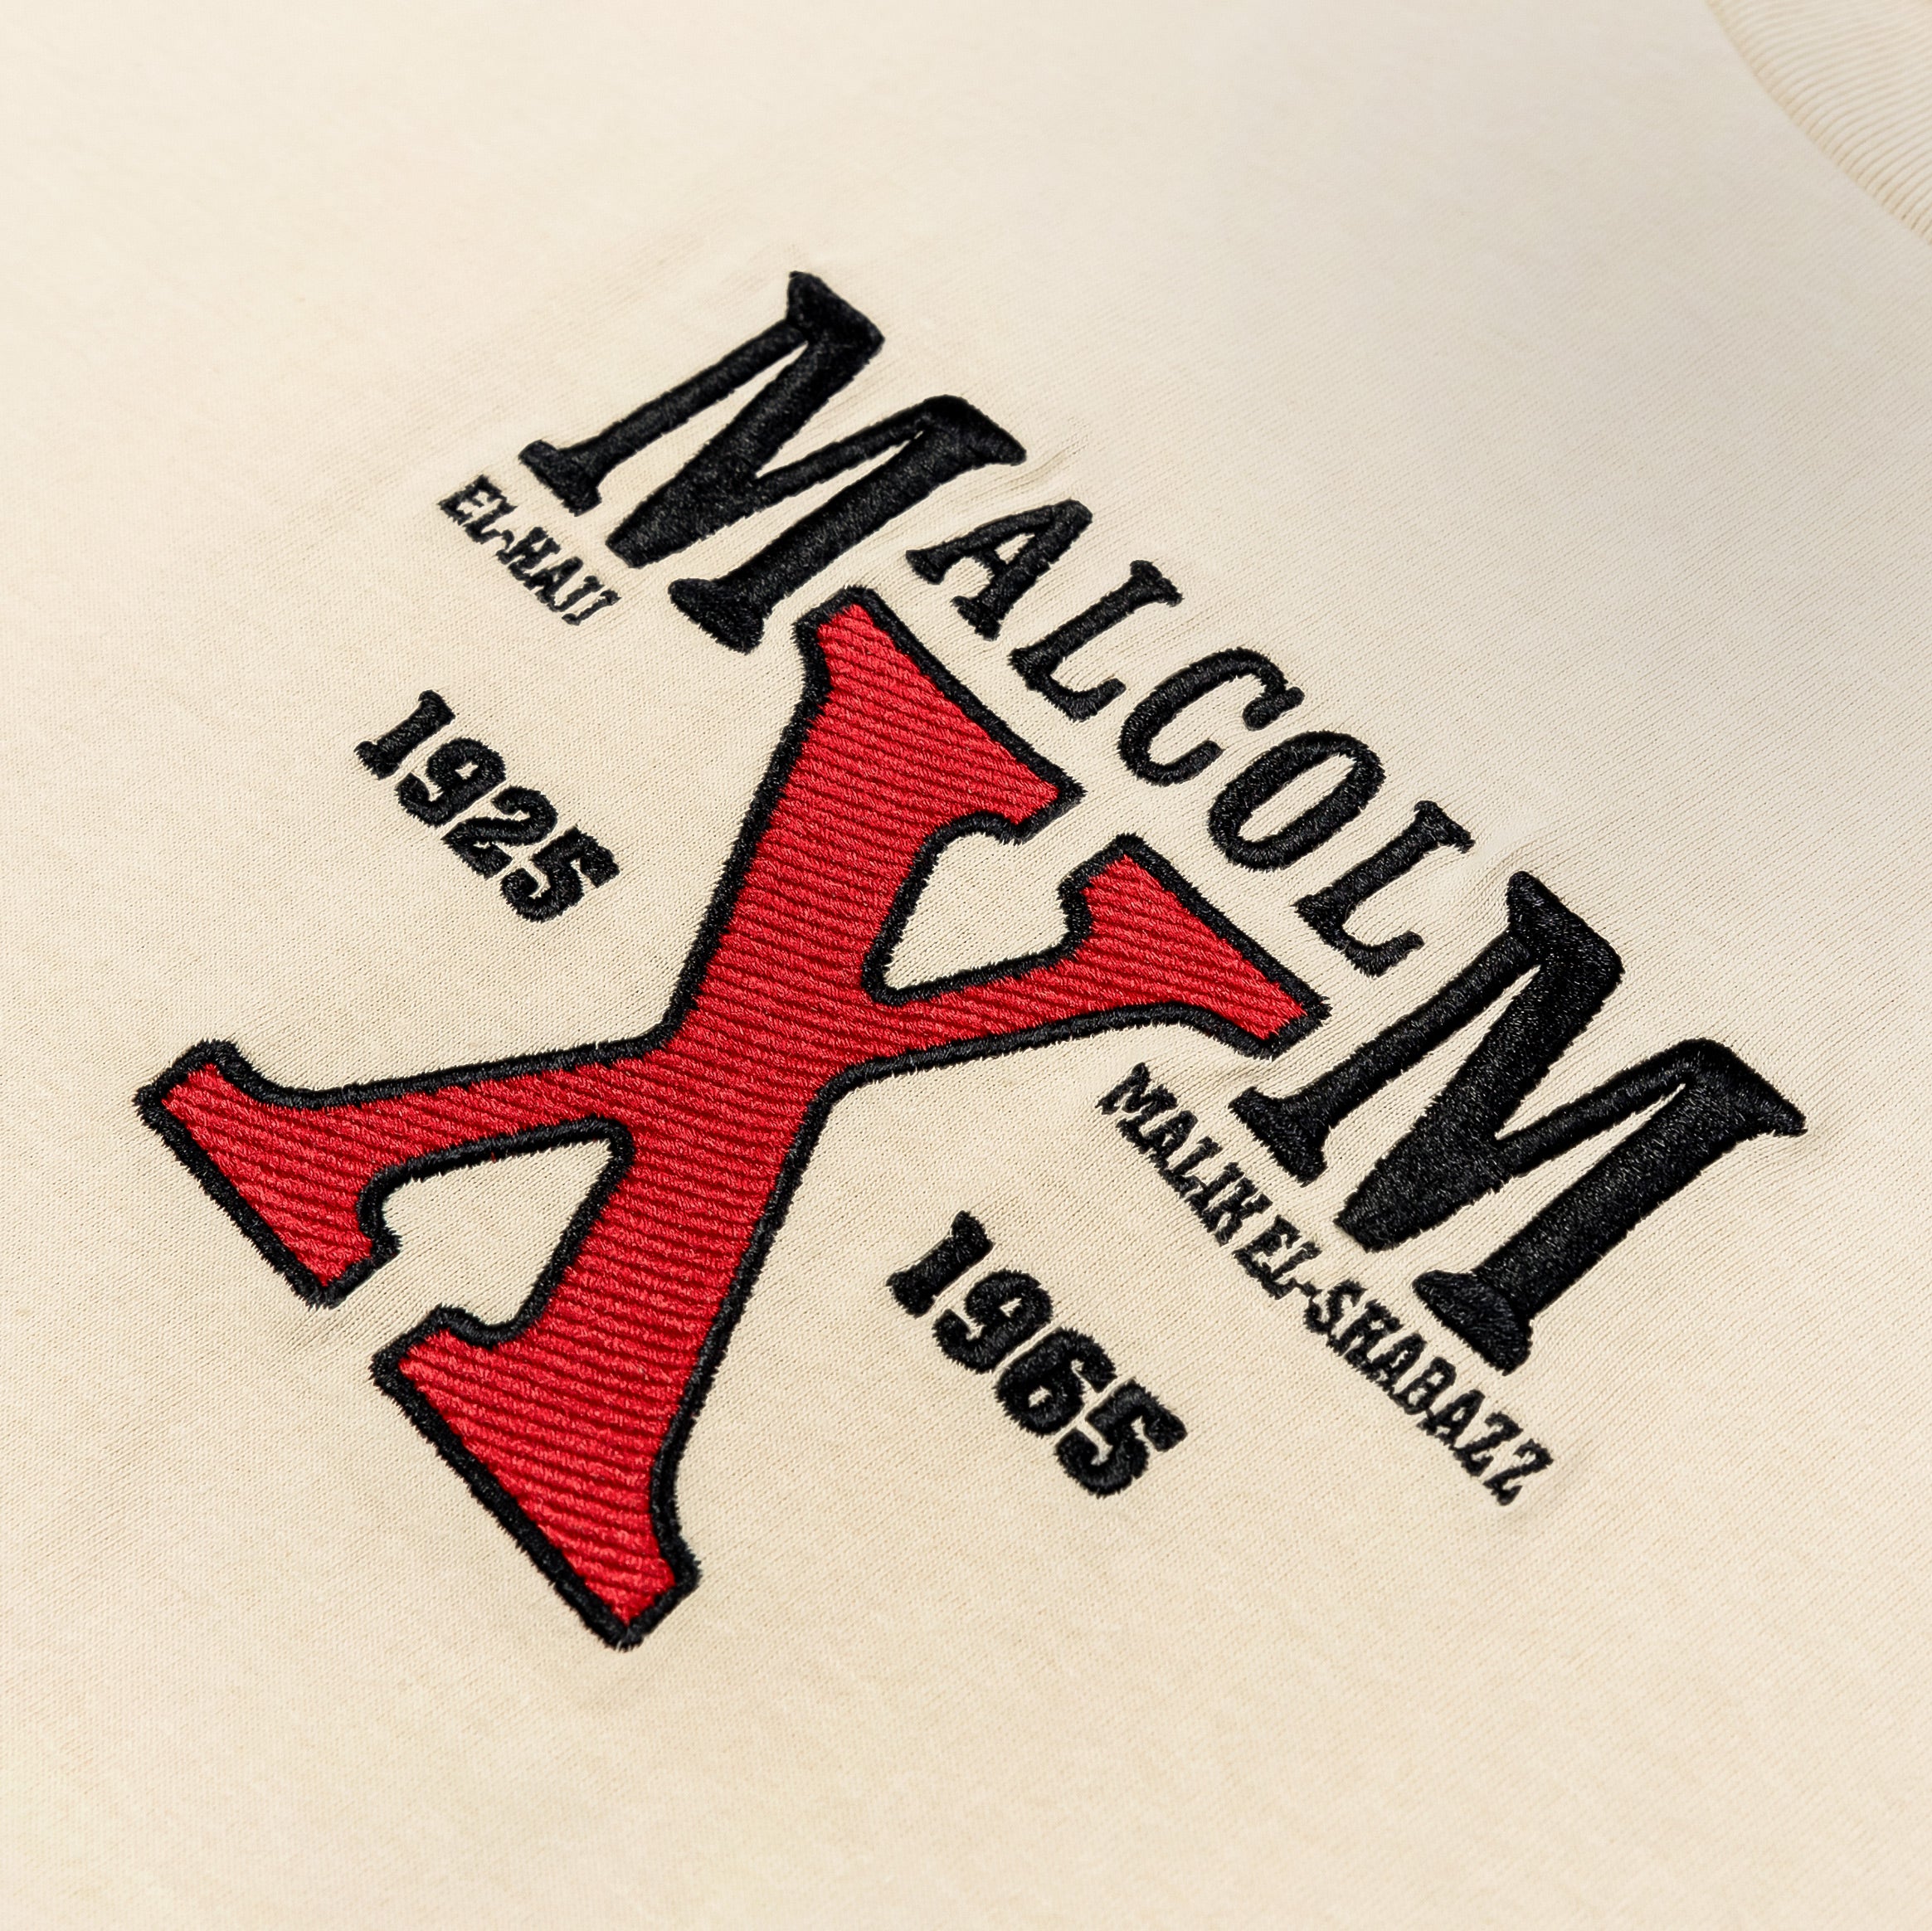 SP x Malcom X Any Means Mens Short Sleeve Shirt (Beige/Red)